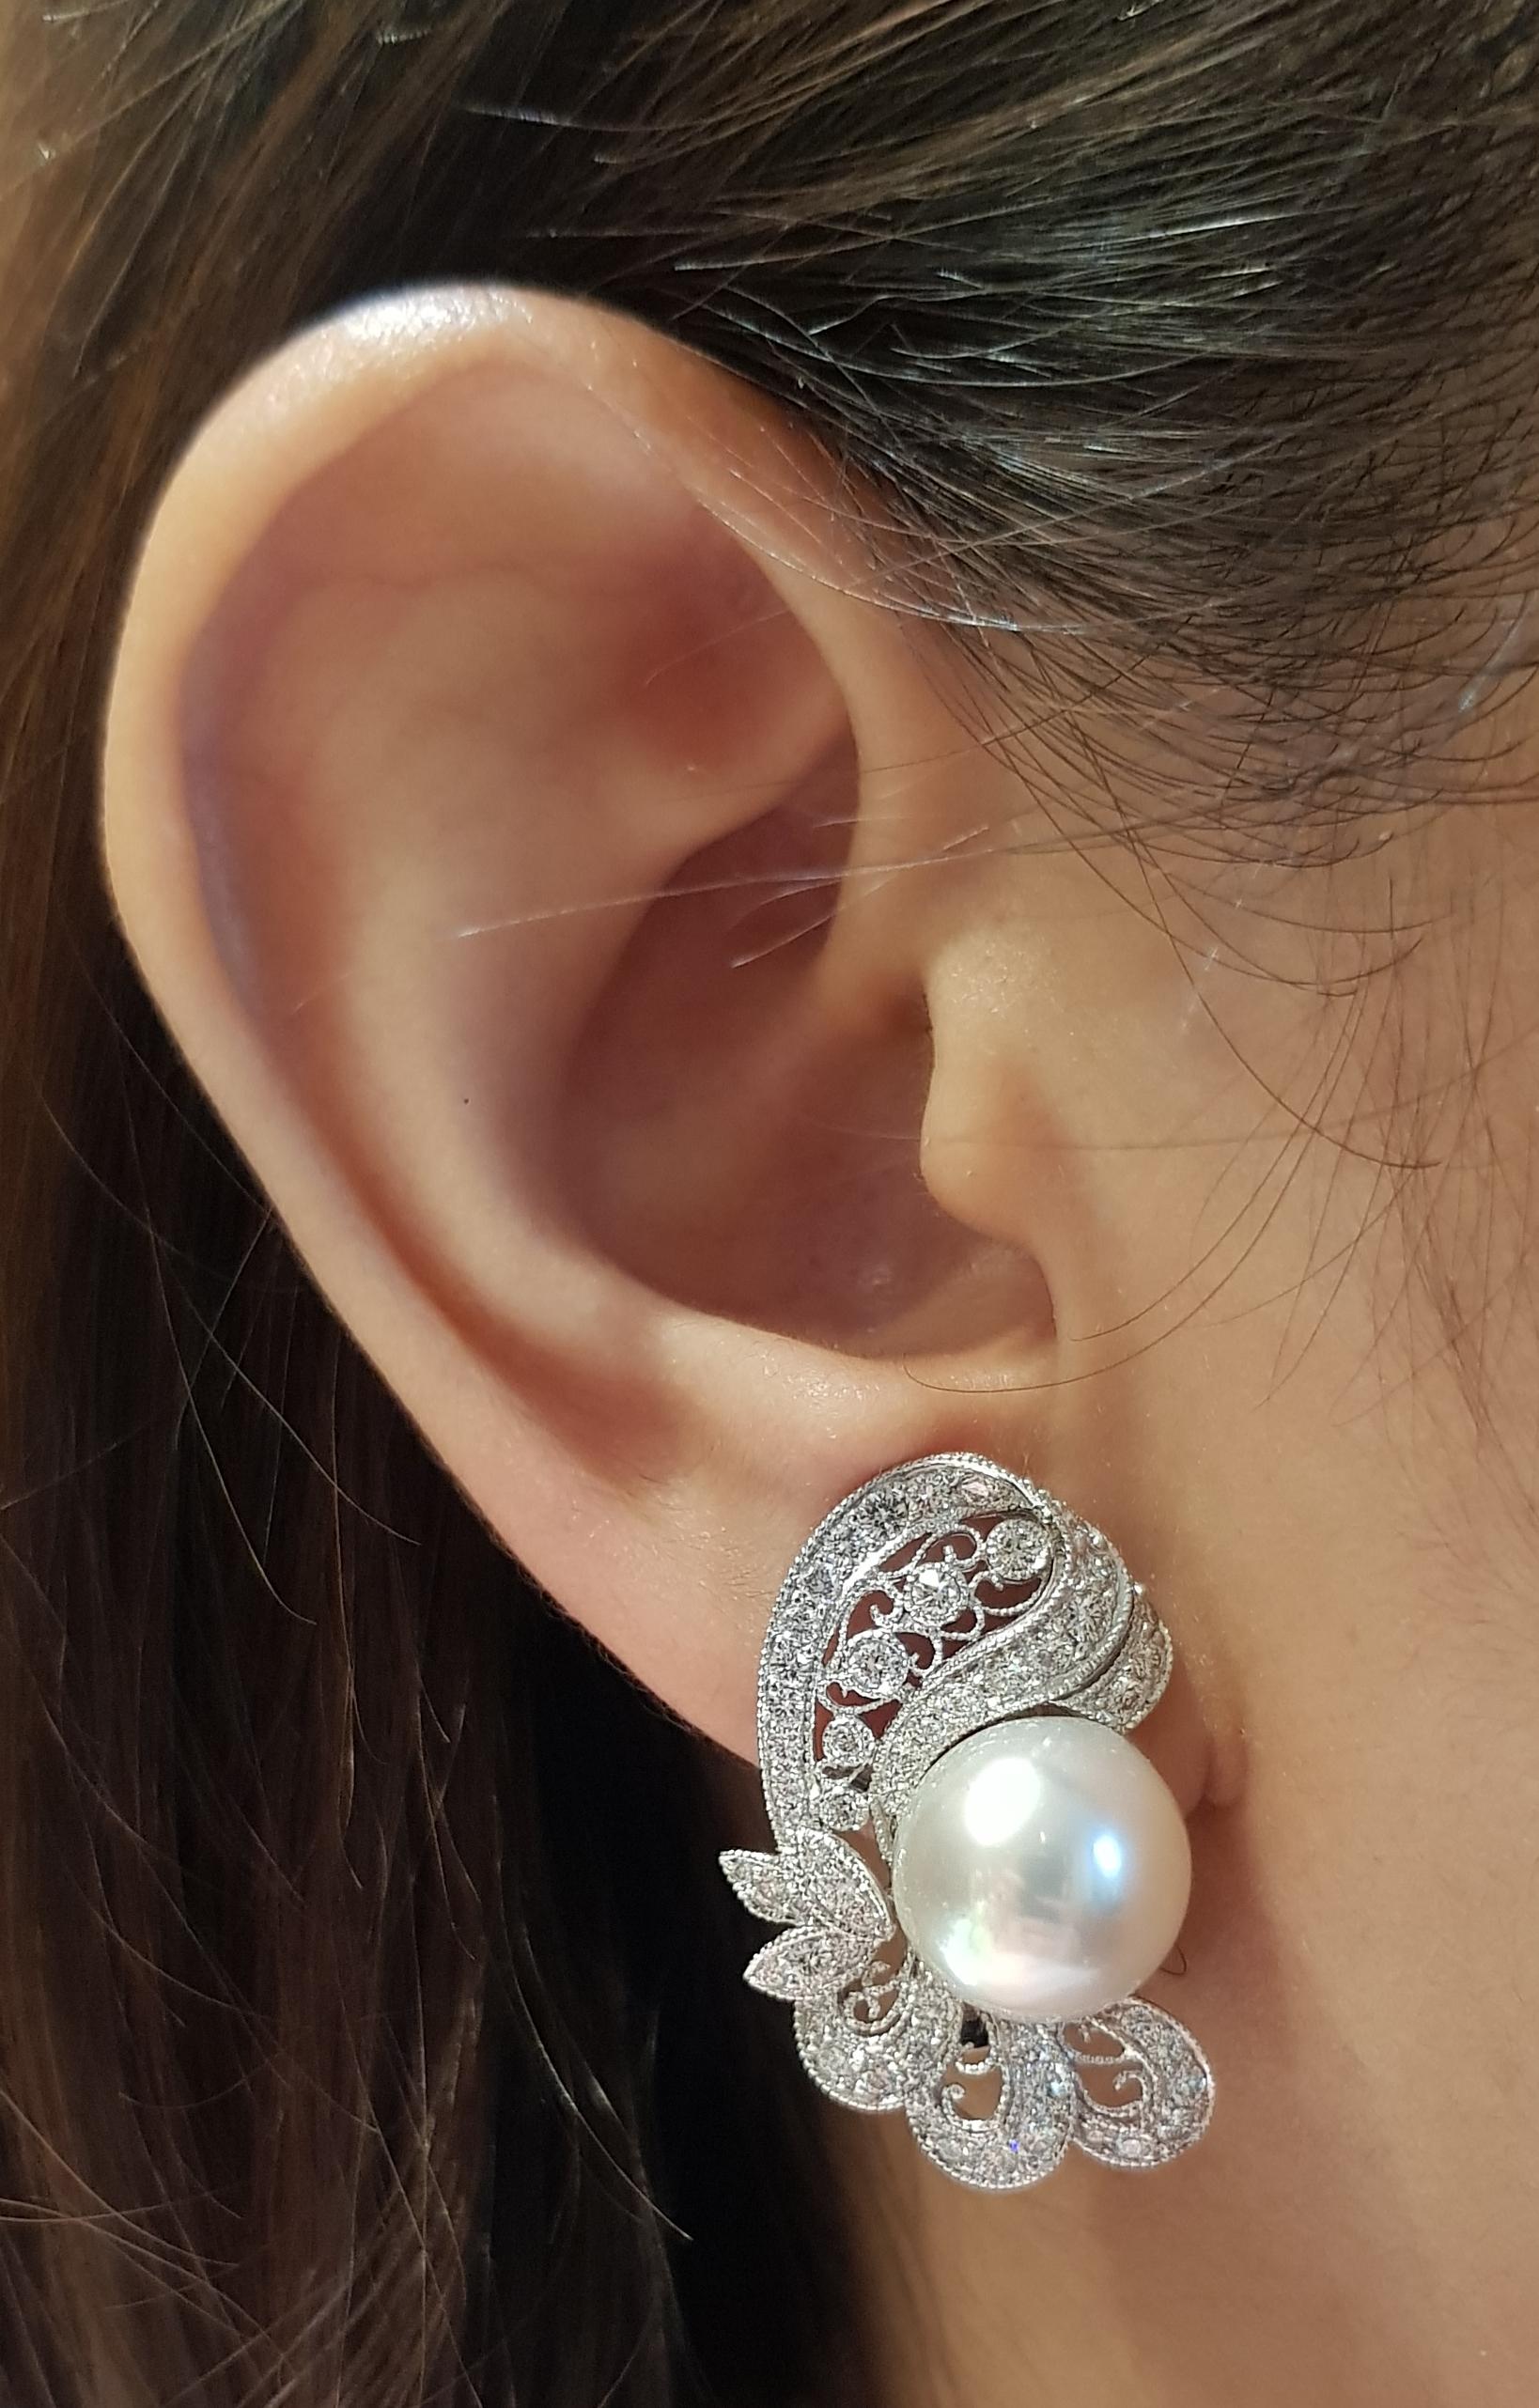 Pearl with Diamond 1.51 carats Earrings set in 18 Karat White Gold Settings

Width:  1.8 cm 
Length:  2.9 cm
Total Weight: 15.13 grams

